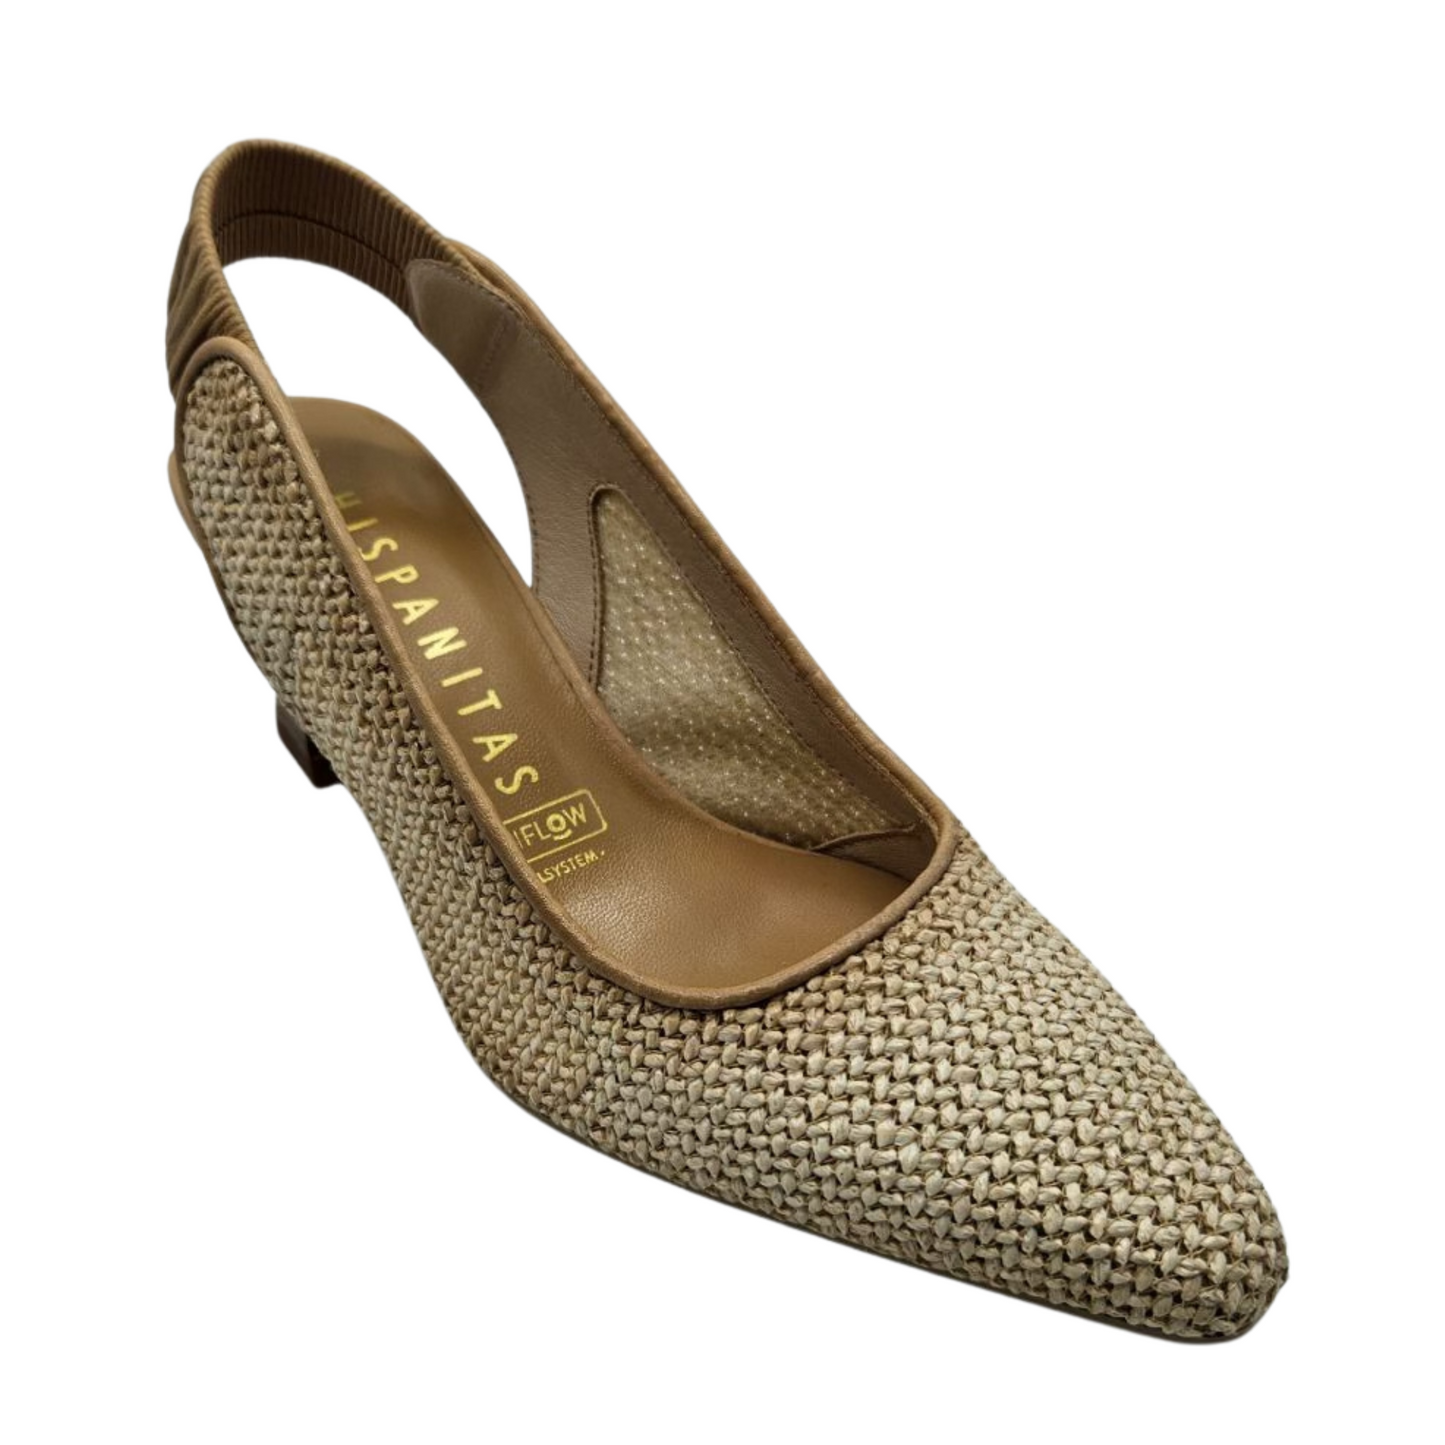 45 degree angled view of cream coloured woven pump with flared heel and elastic slingback strap